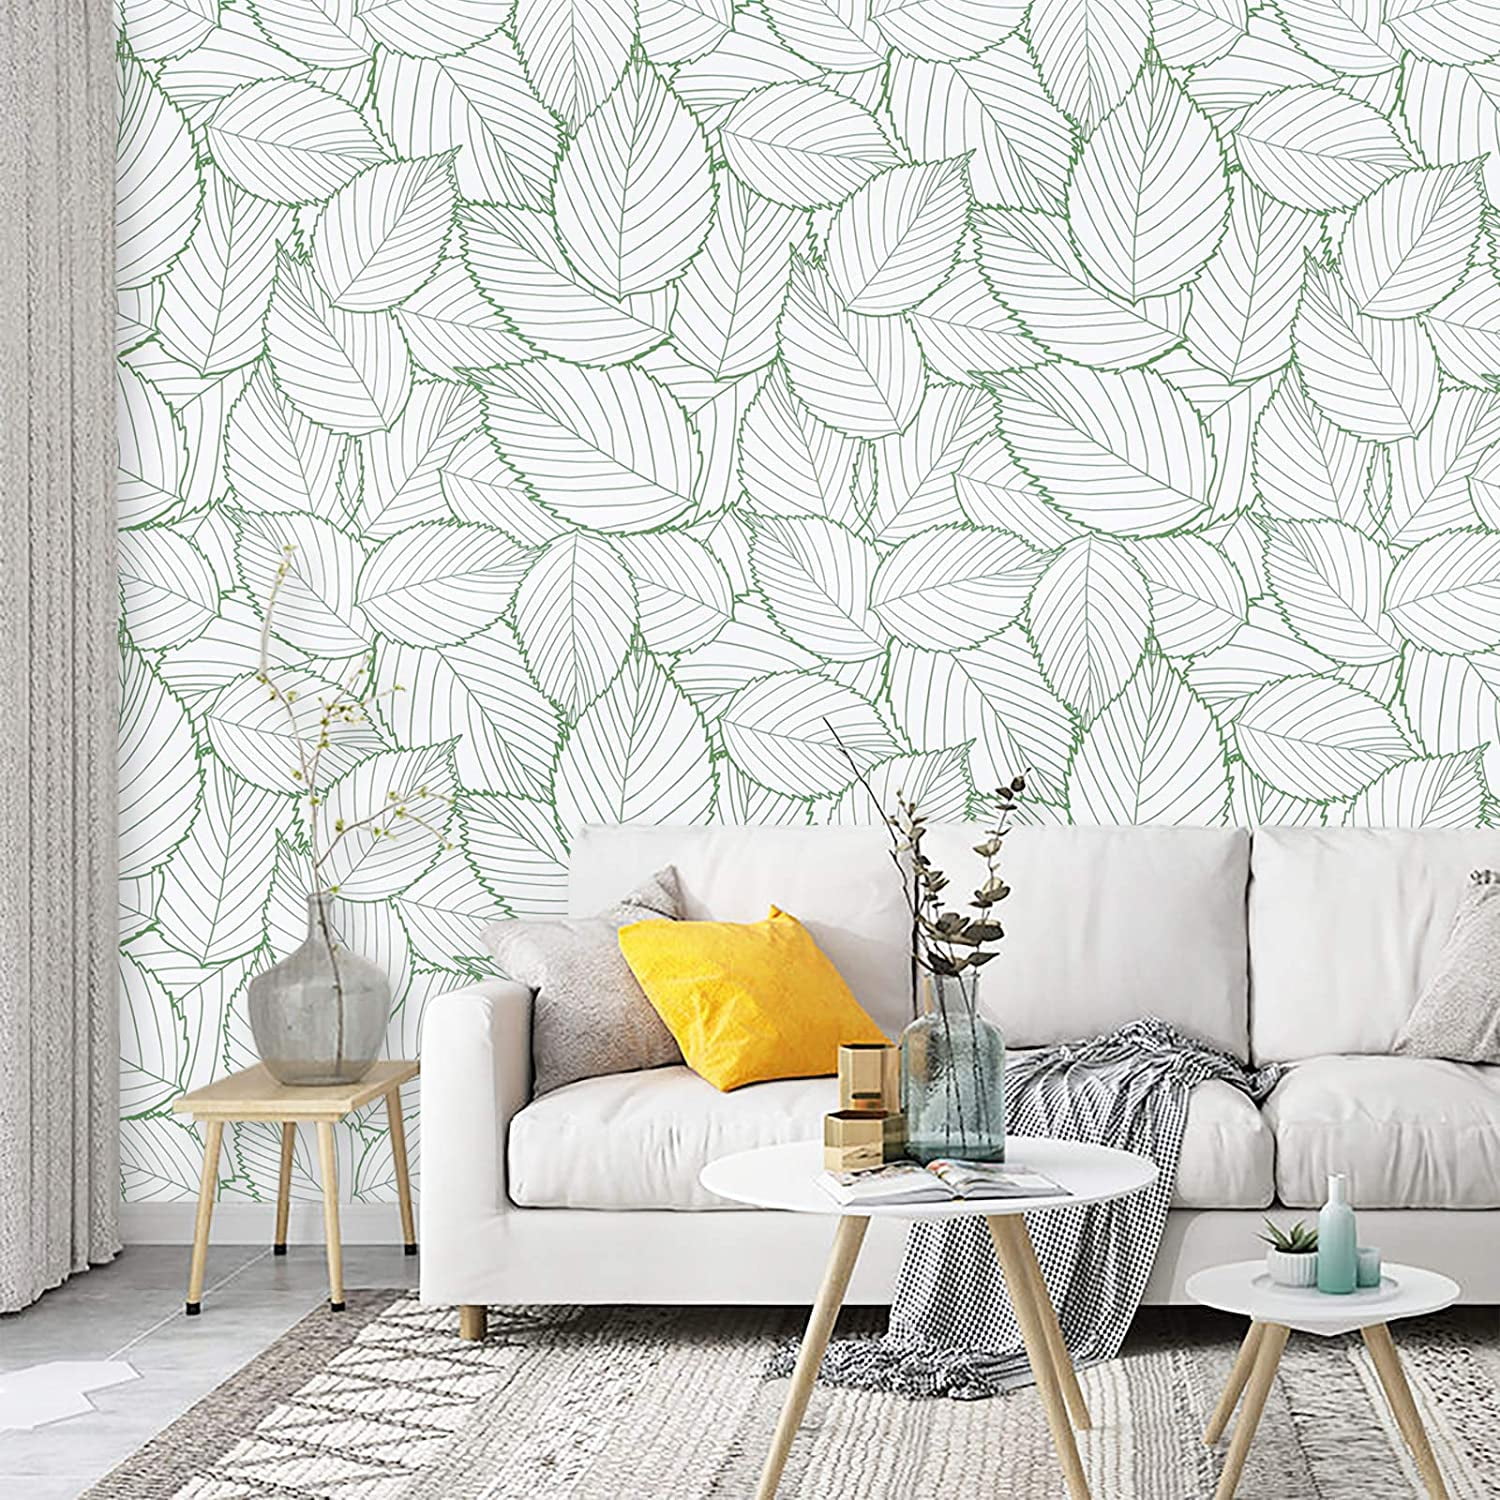 RoomMates Tropical Leaf Green And White Botanical Vinyl Peel & Stick  Wallpaper Roll (Covers 28.18 Sq. Ft.) RMK11045WP - The Home Depot